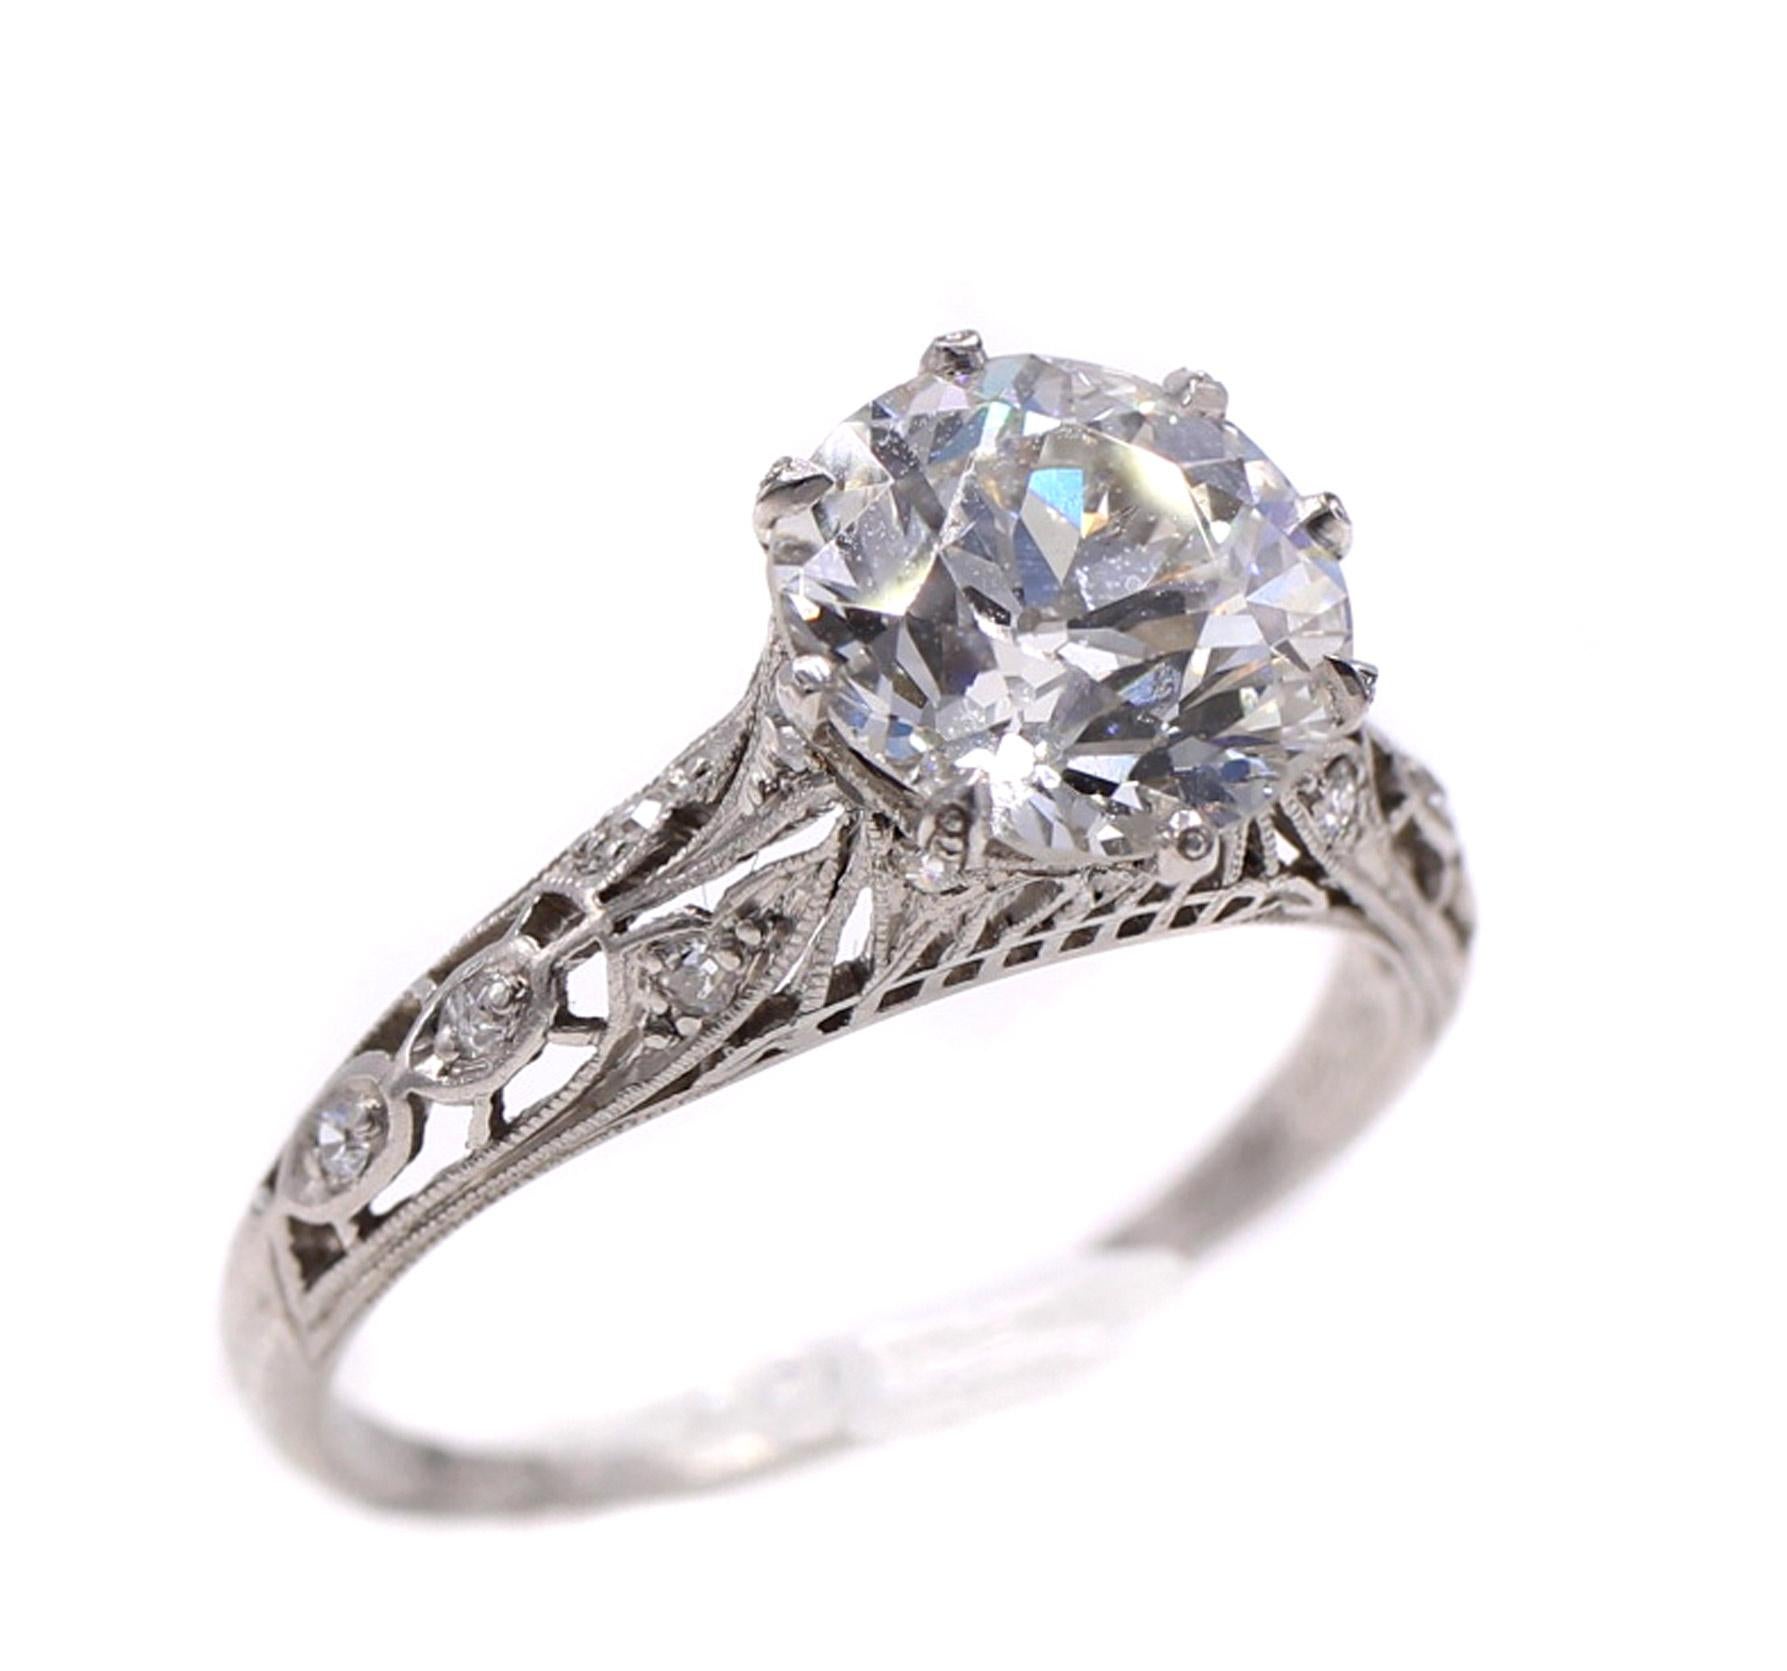 Beautifully designed and masterfully handcrafted this platinum ring features fine ajour and milligrain work throughout the gallery and shank. Embellished by small round old cut diamonds, the center Old European cut diamonds shows off an amazing